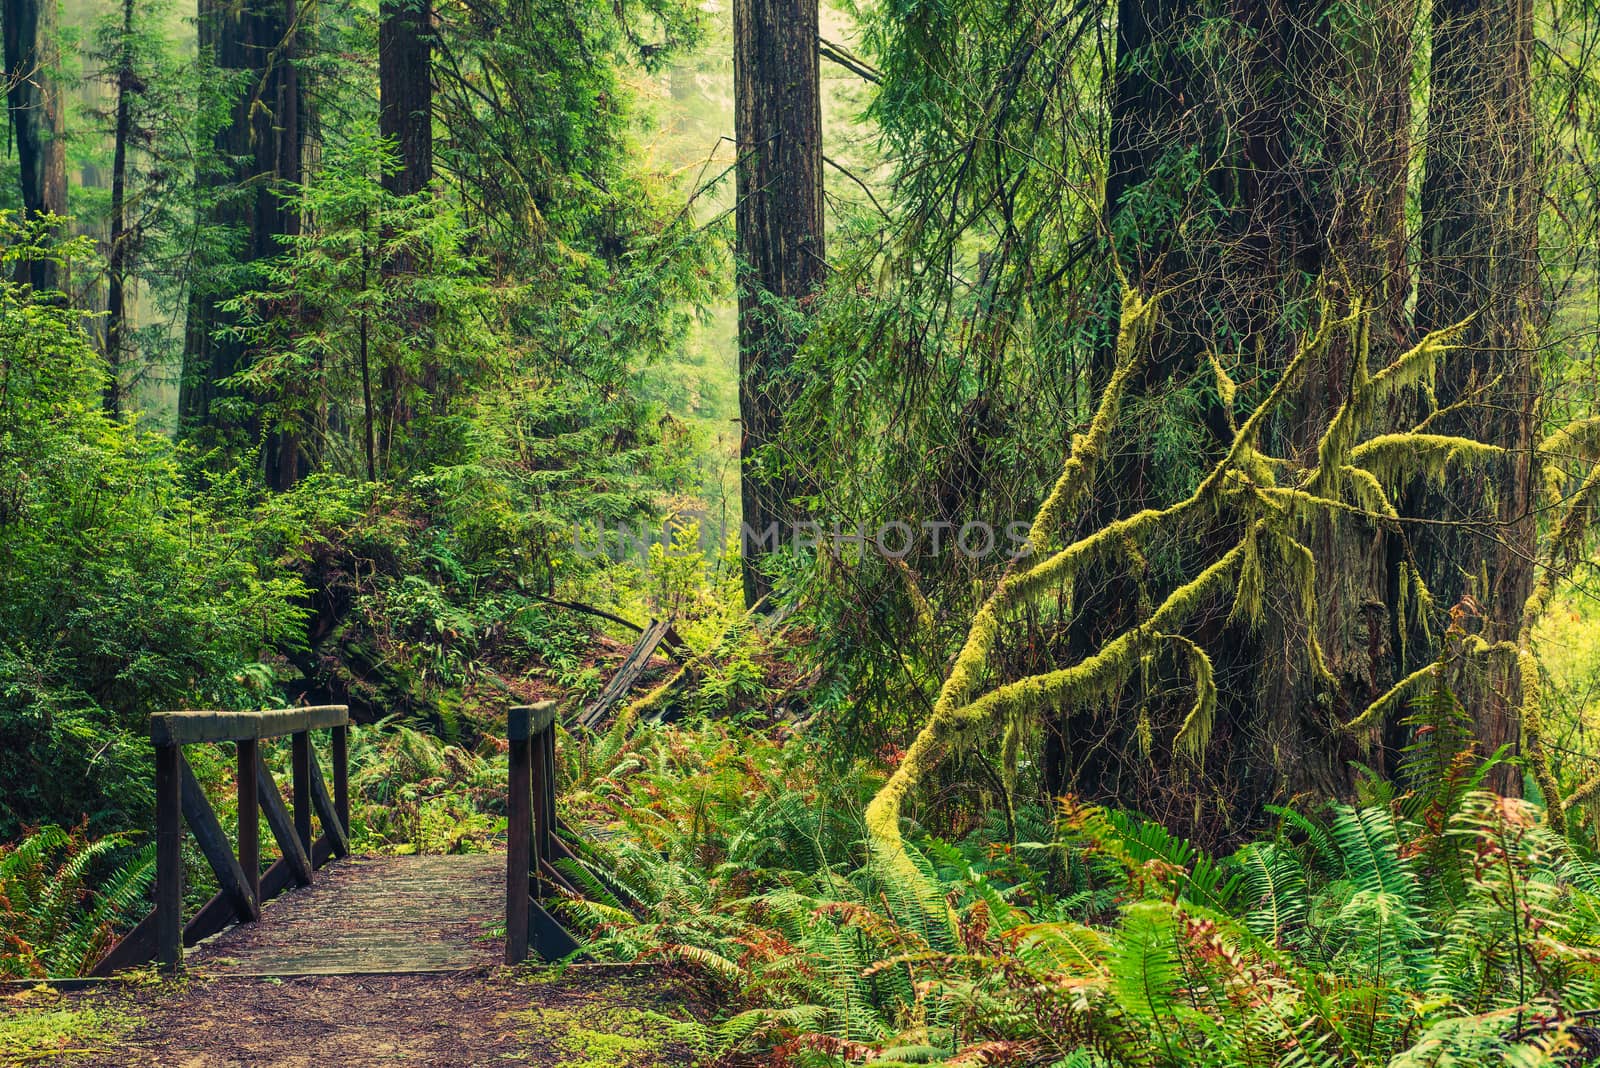 Redwood Forest Trail and Old Wooden Trail Bridge in Northern California Redwoods. United States.